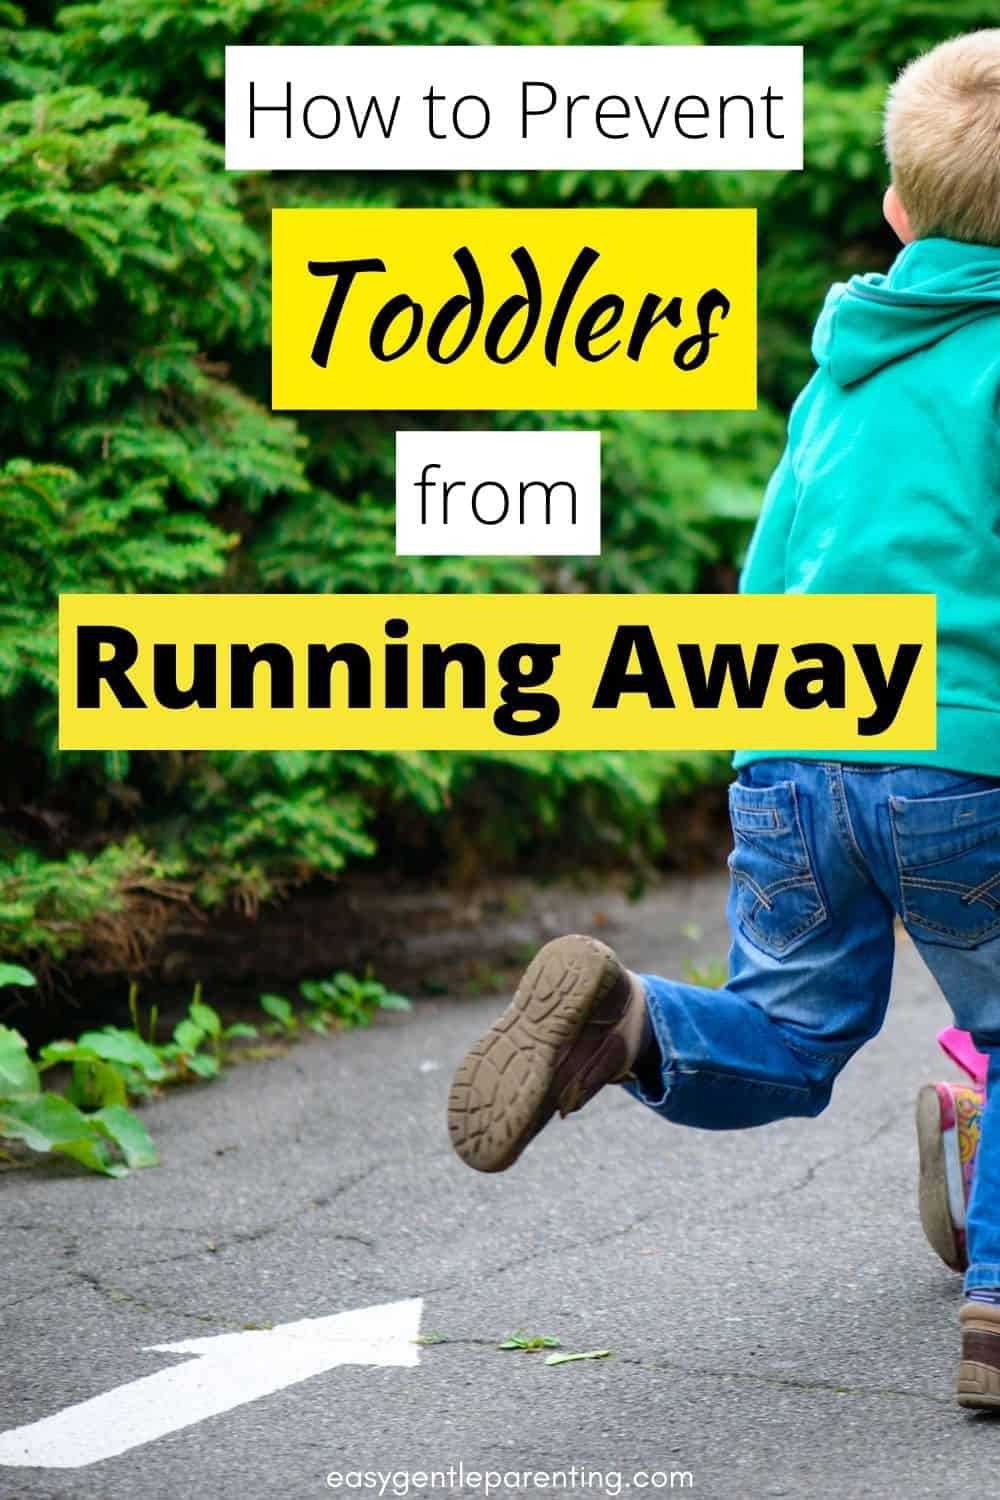 Text reads "How to prevent toddlers from running away"